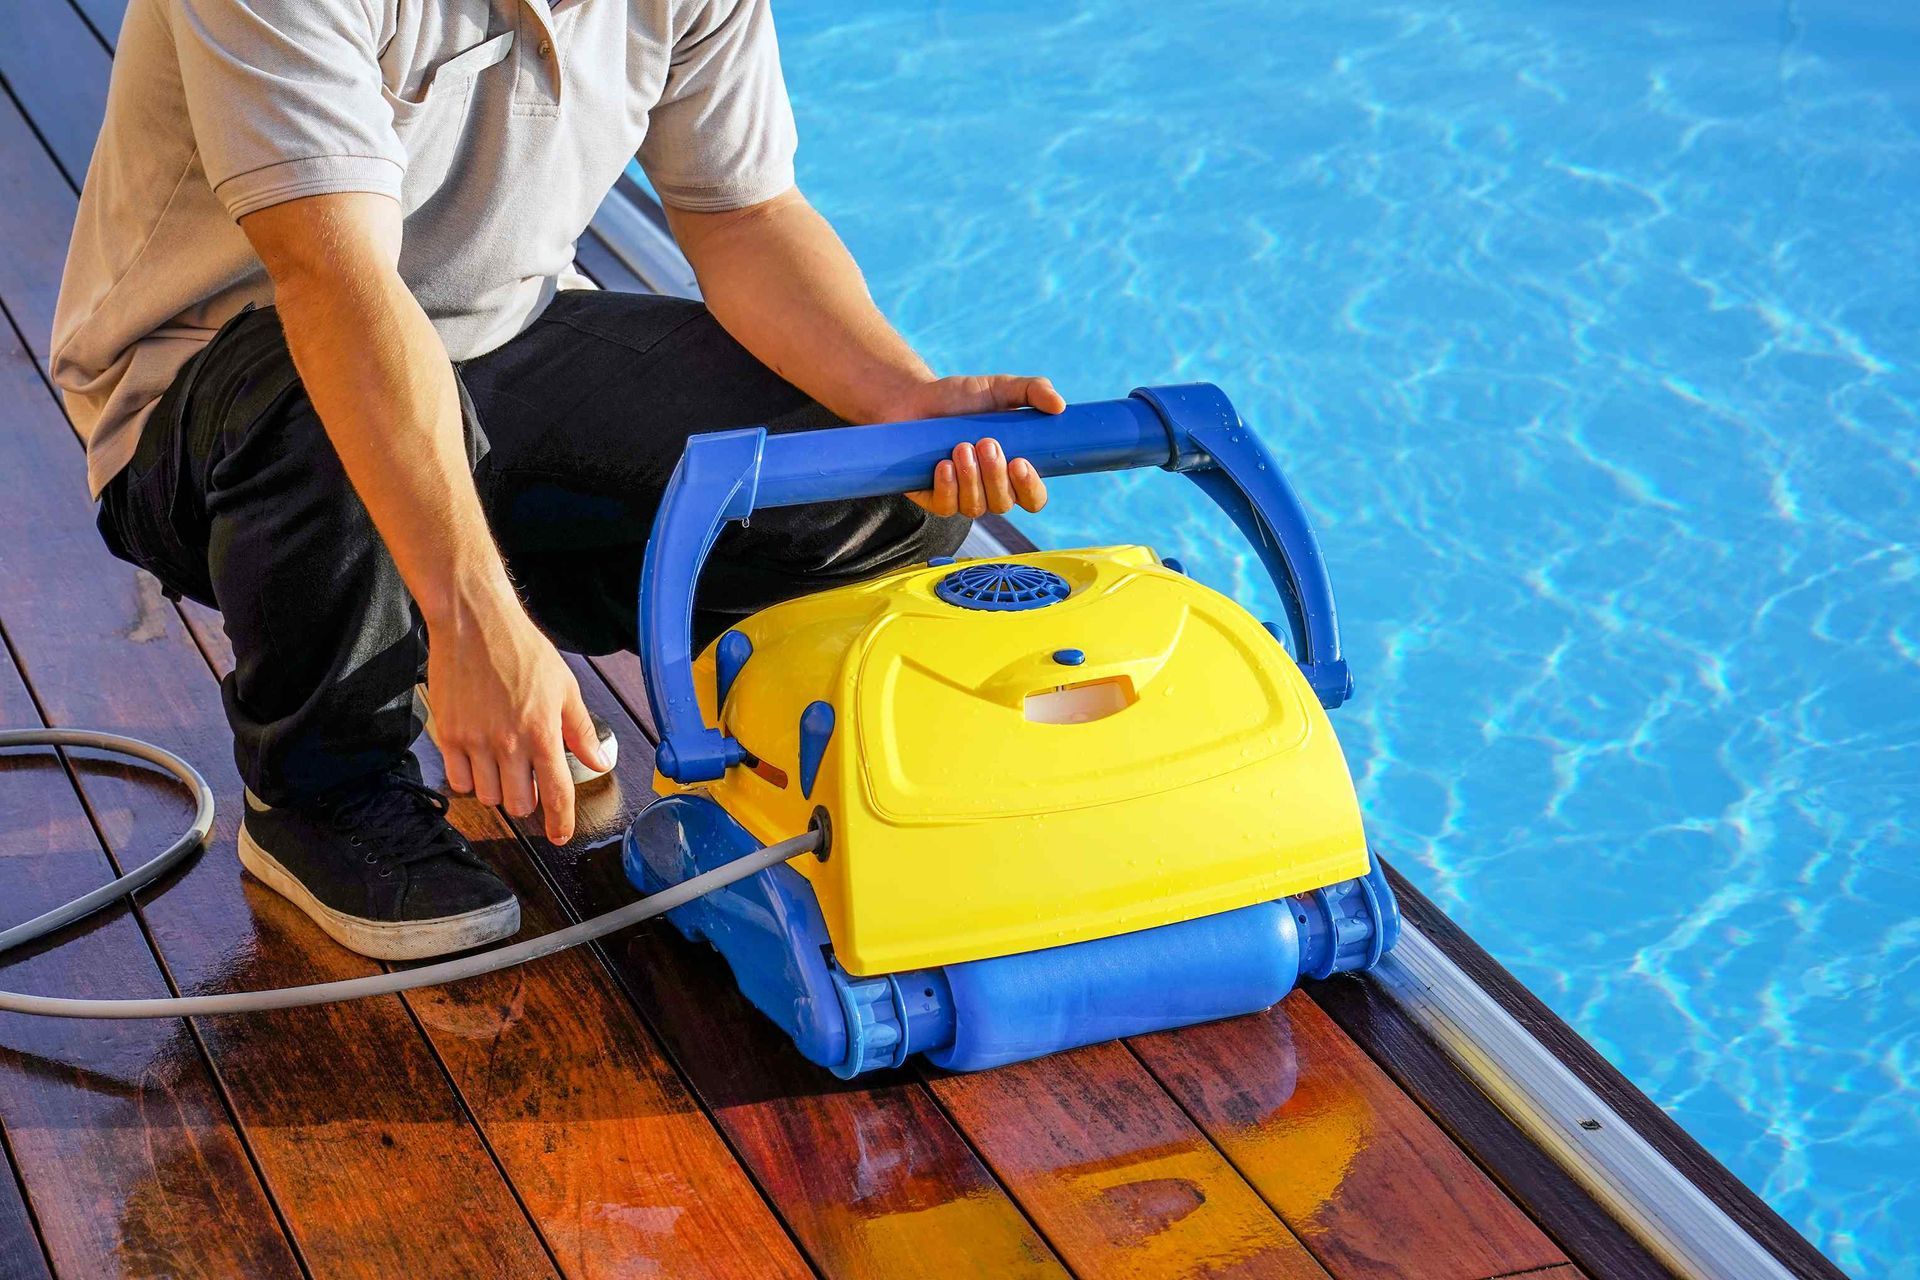 Tech using pool cleaning device